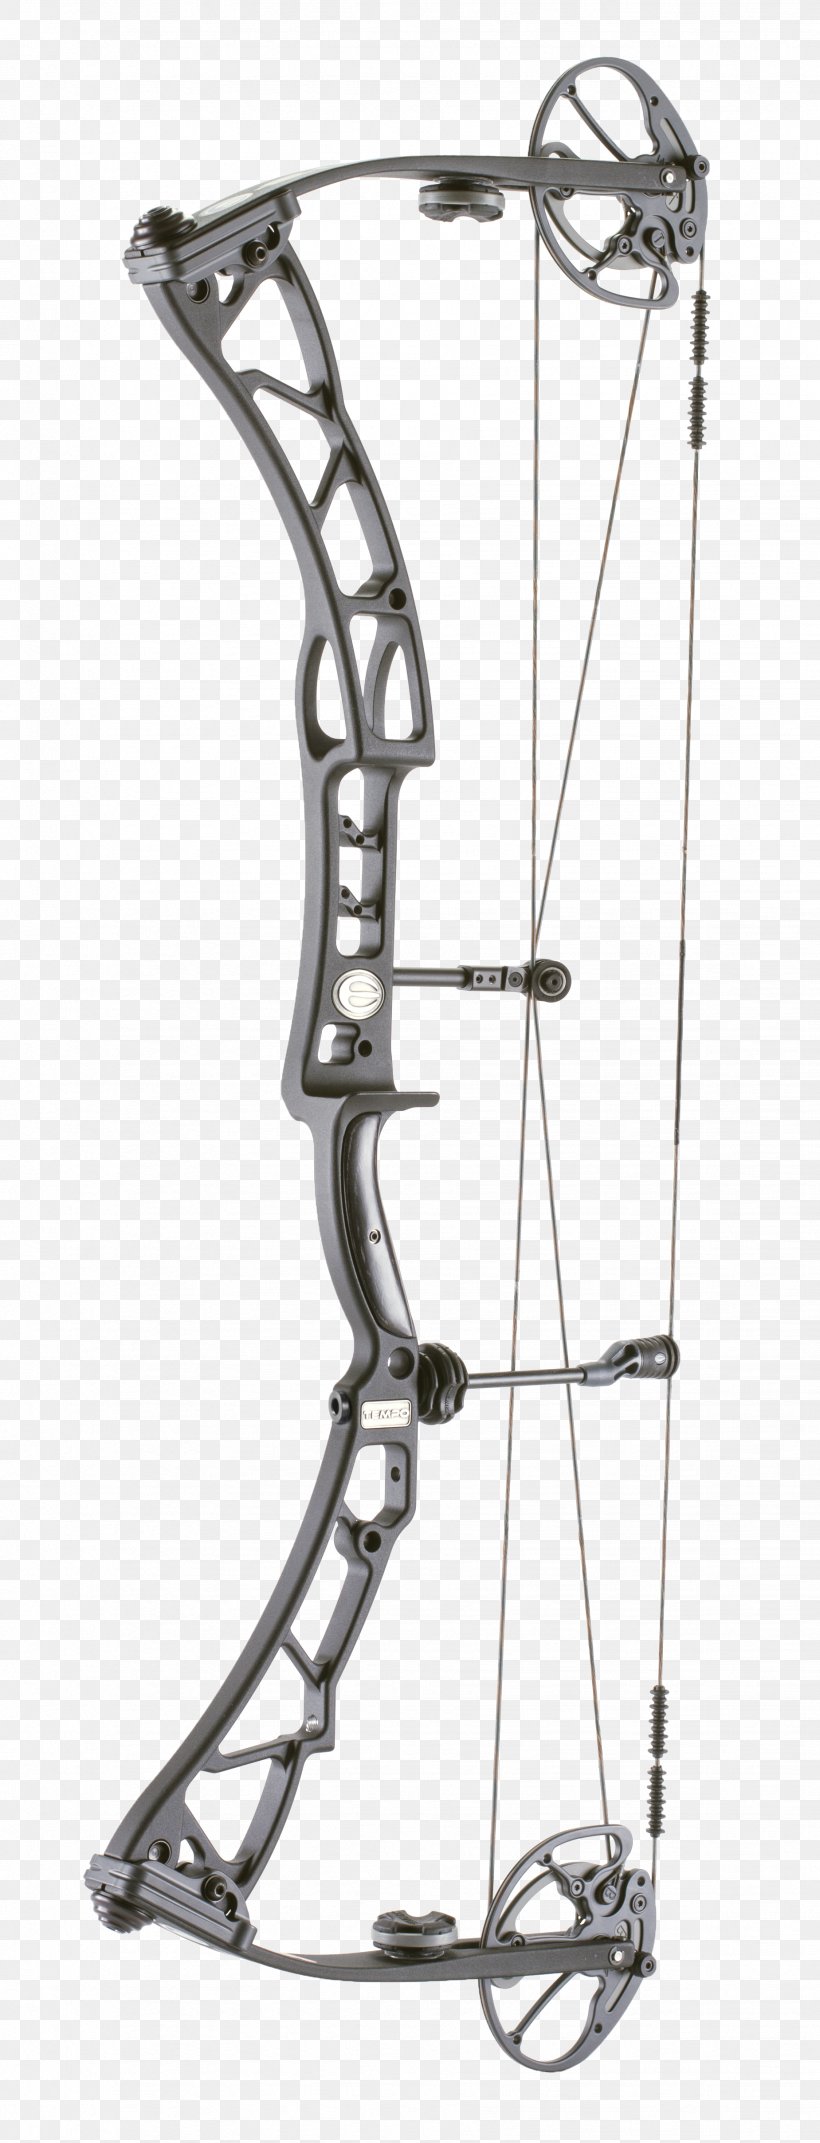 Compound Bows Target Archery Bow And Arrow Bowhunting, PNG, 1849x4834px, Compound Bows, Archery, Bow, Bow And Arrow, Bowhunting Download Free